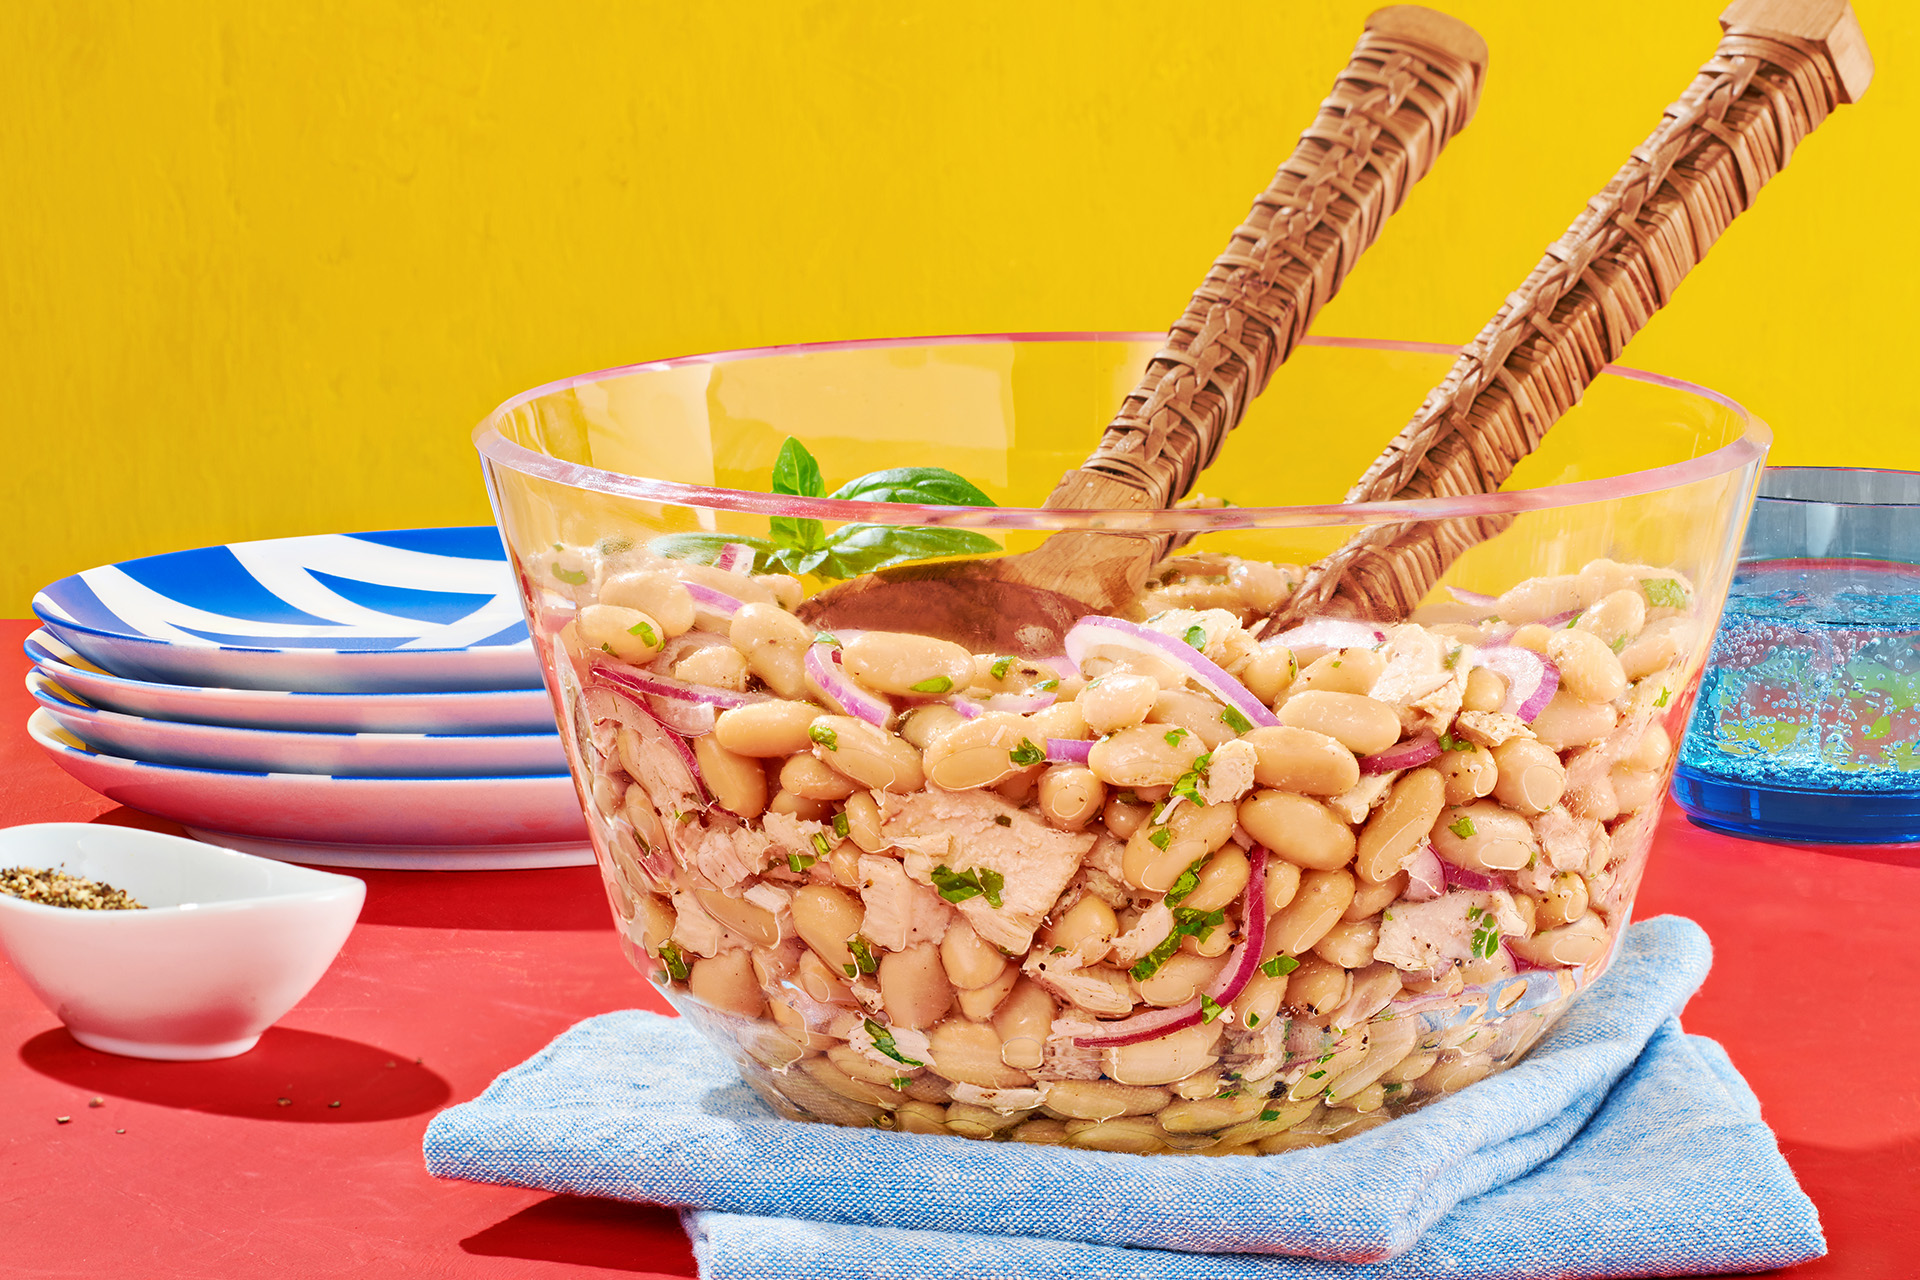 Tuna cannellini salad in a clear bowl with wooden serving spoons